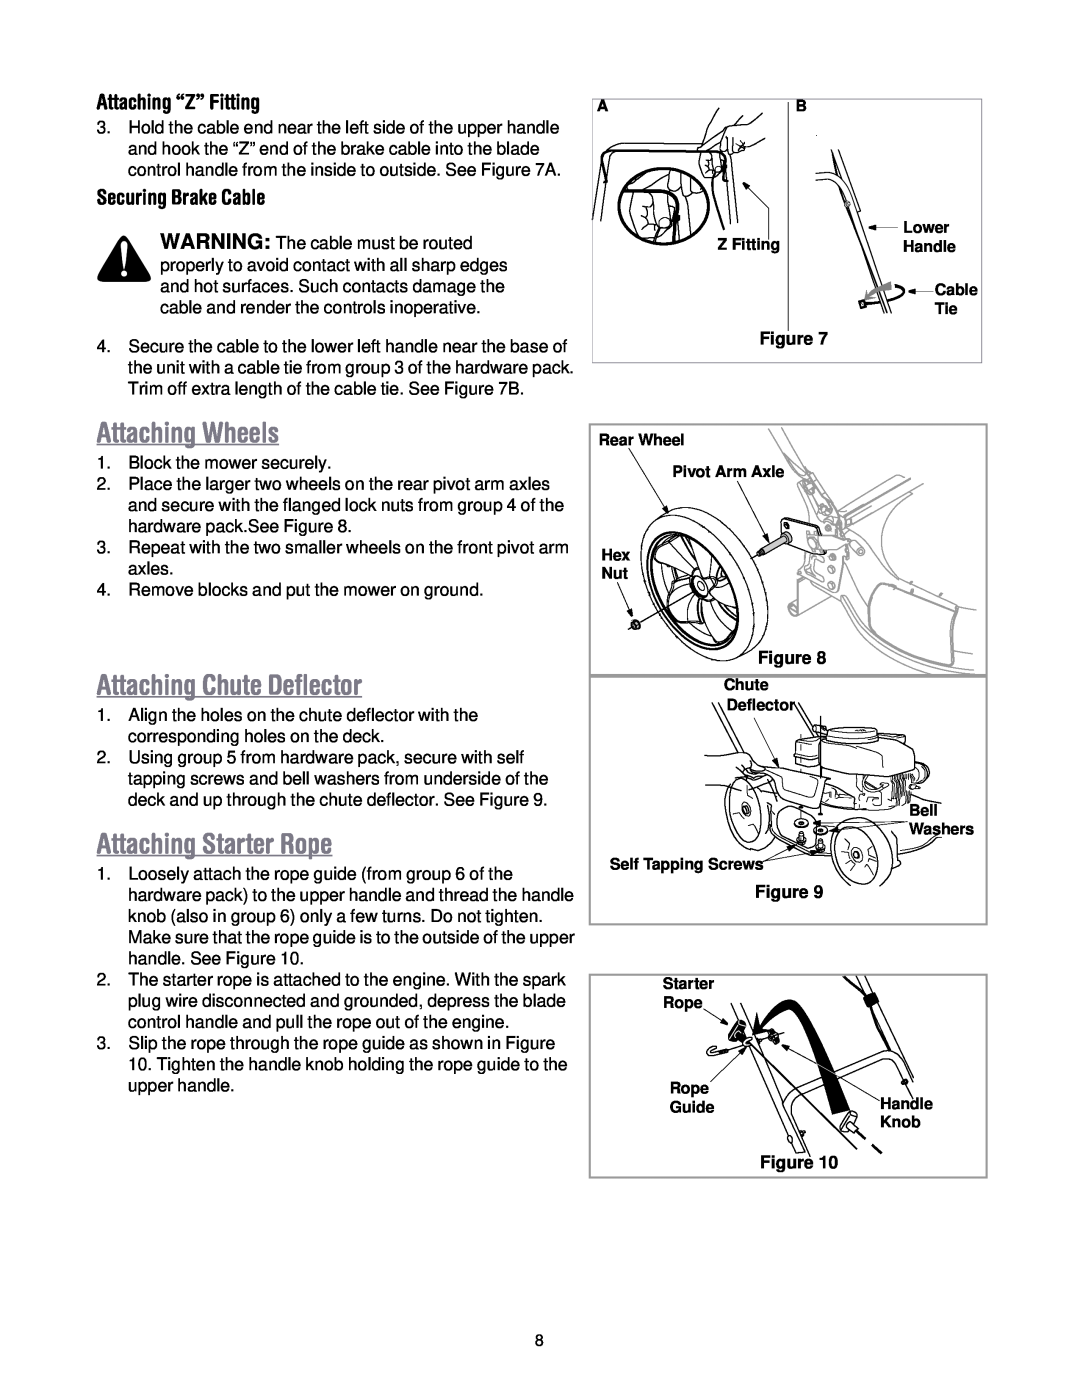 MTD 50 Attaching Wheels, Attaching Chute Deflector, Attaching Starter Rope, Attaching “Z” Fitting, Securing Brake Cable 